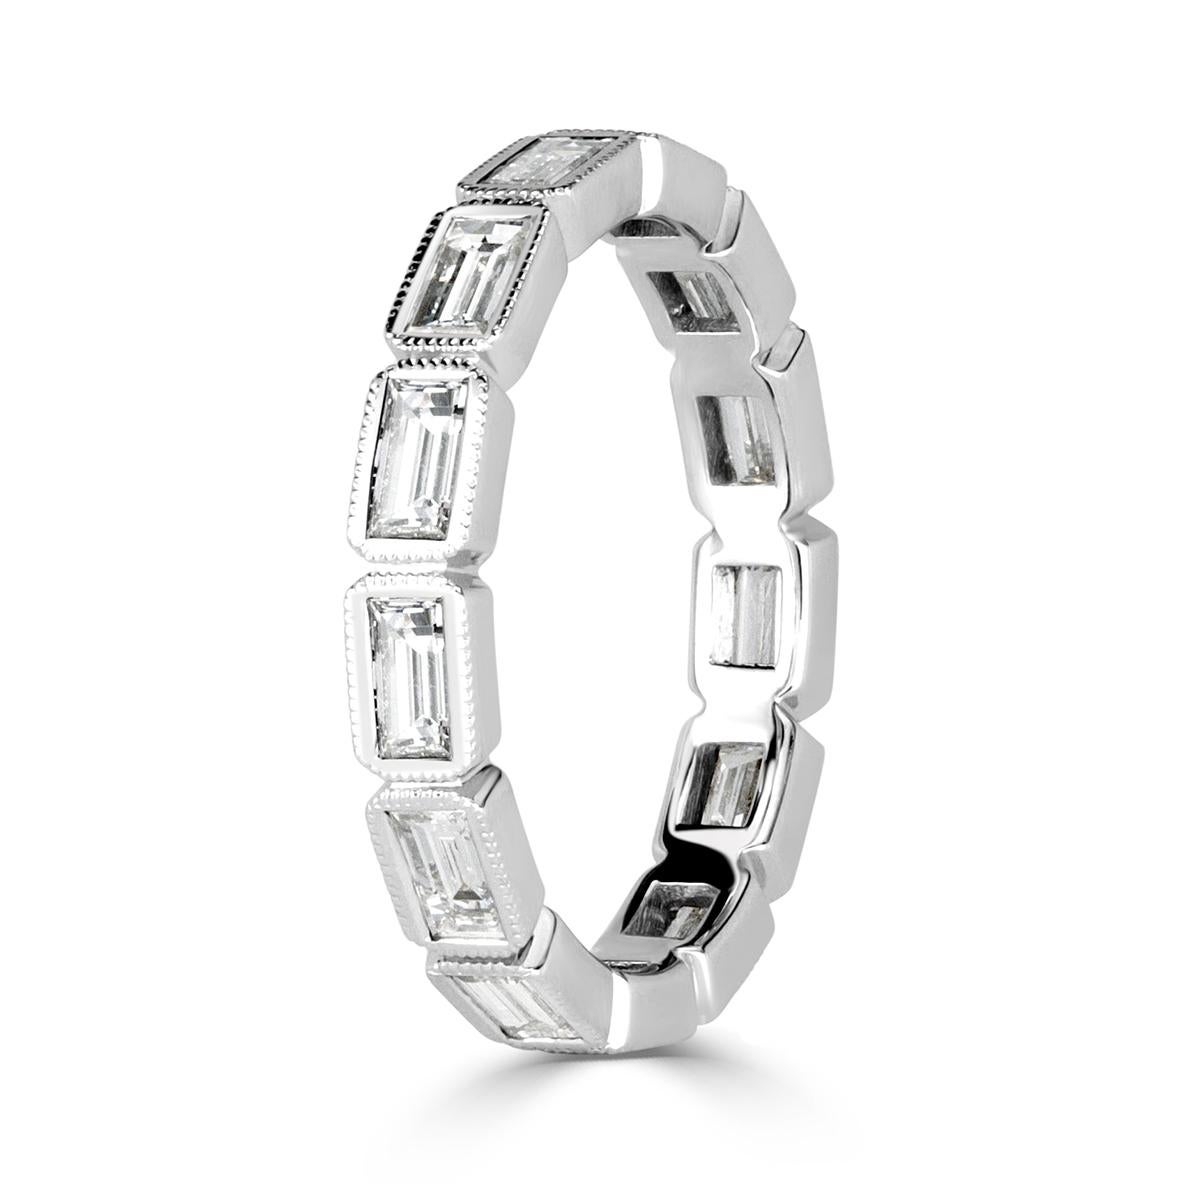 Designed to perfection in high polish platinum, this stunning diamond eternity band showcases 1.40ct of baguette cut diamonds graded at E-F in color, VS1-VS2 in clarity. The diamonds are each accented with exquisite milgrain detail throughout.